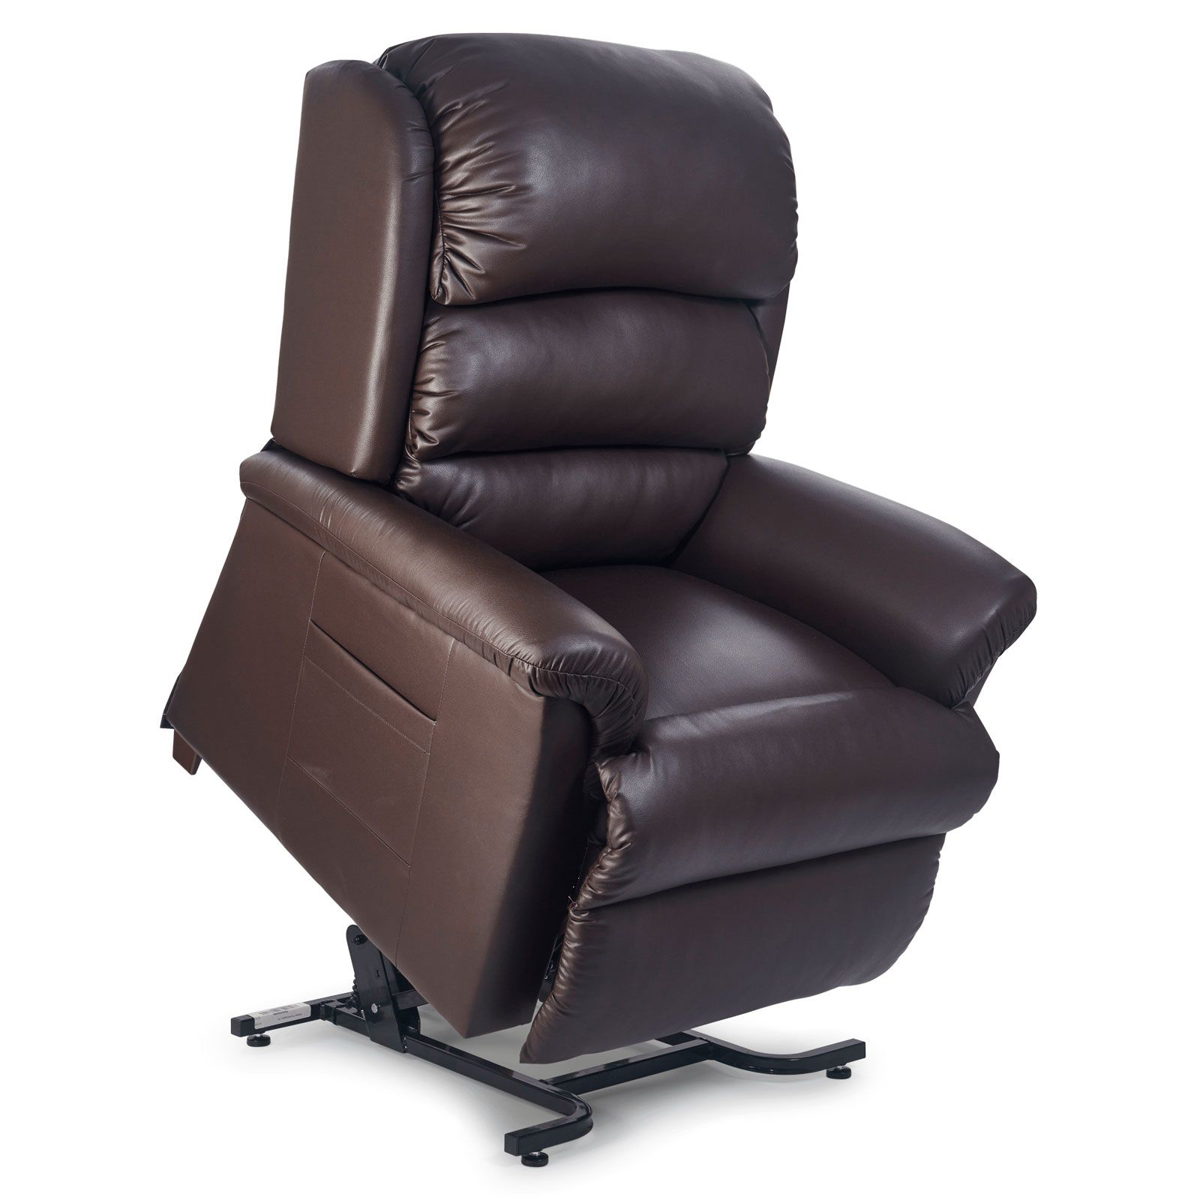 Picture of Mira Large Coffee Bean Lift Chair